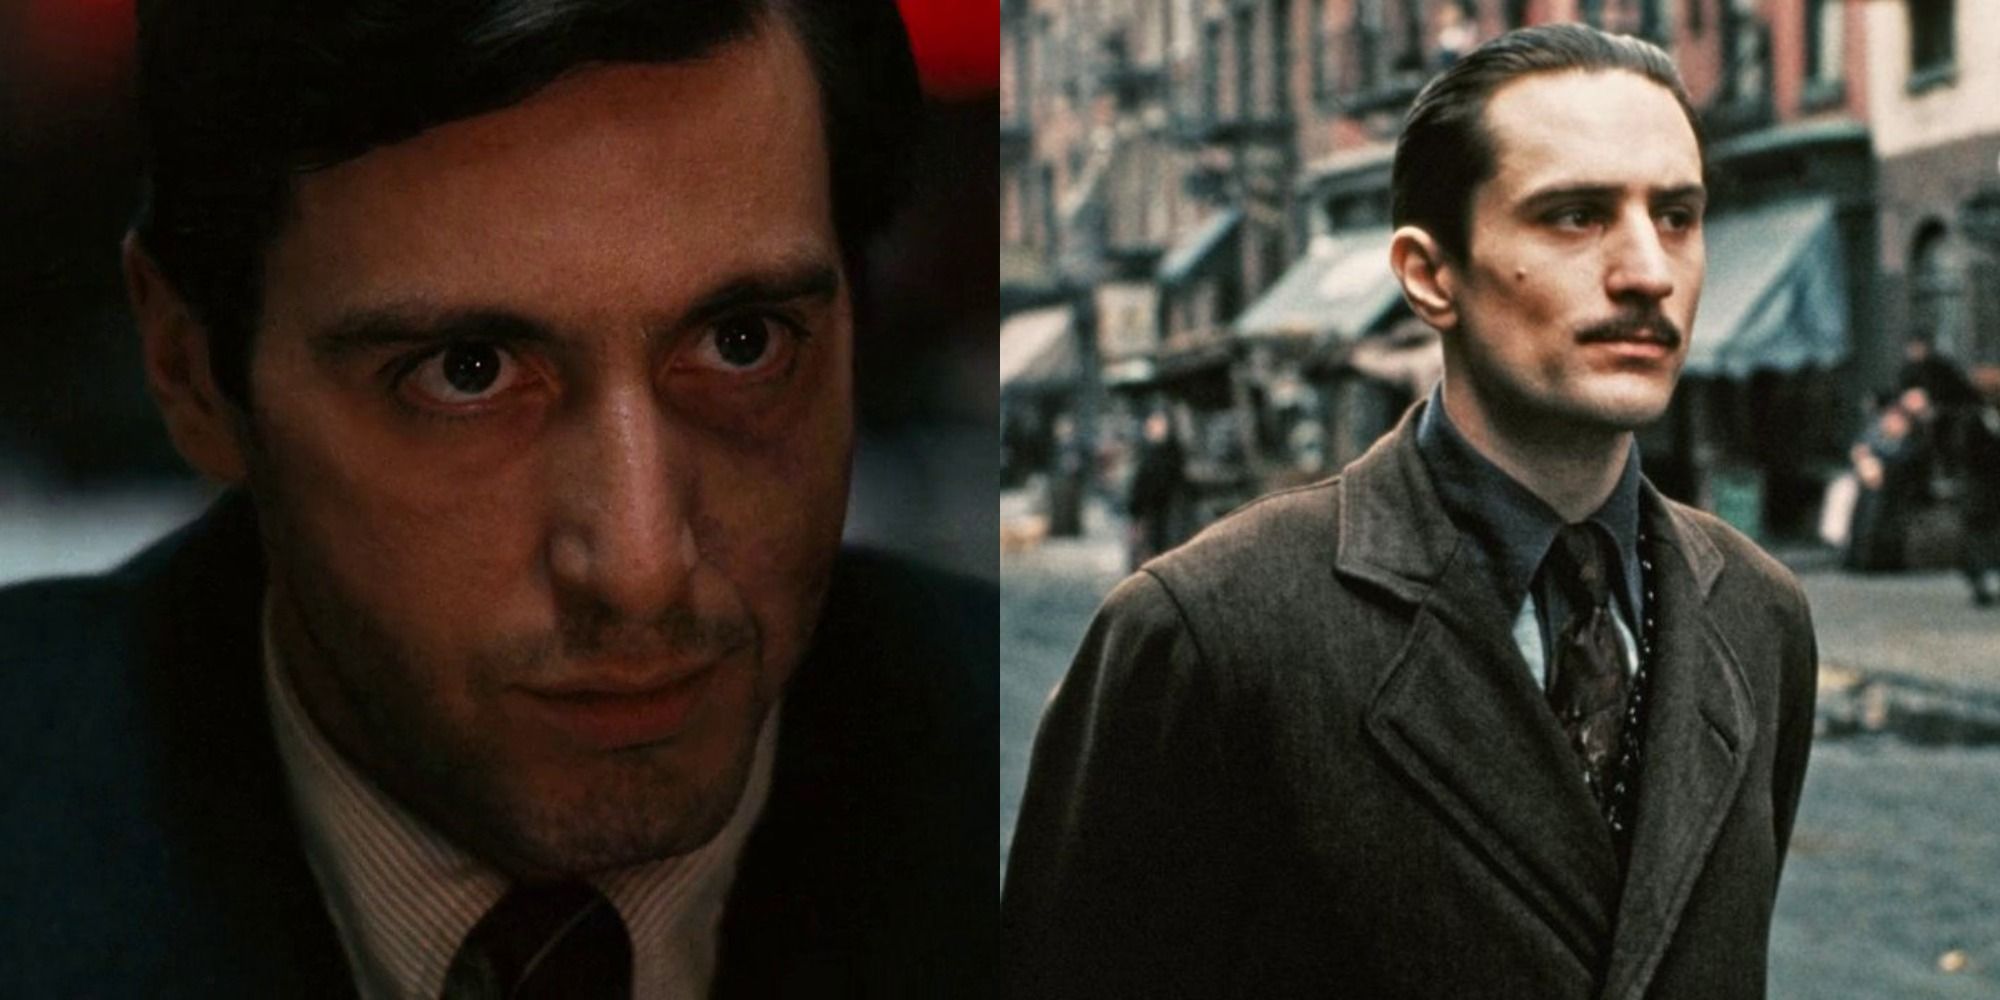 An image of Michael Corleone and a young Vito Corleone in The Godfather movies